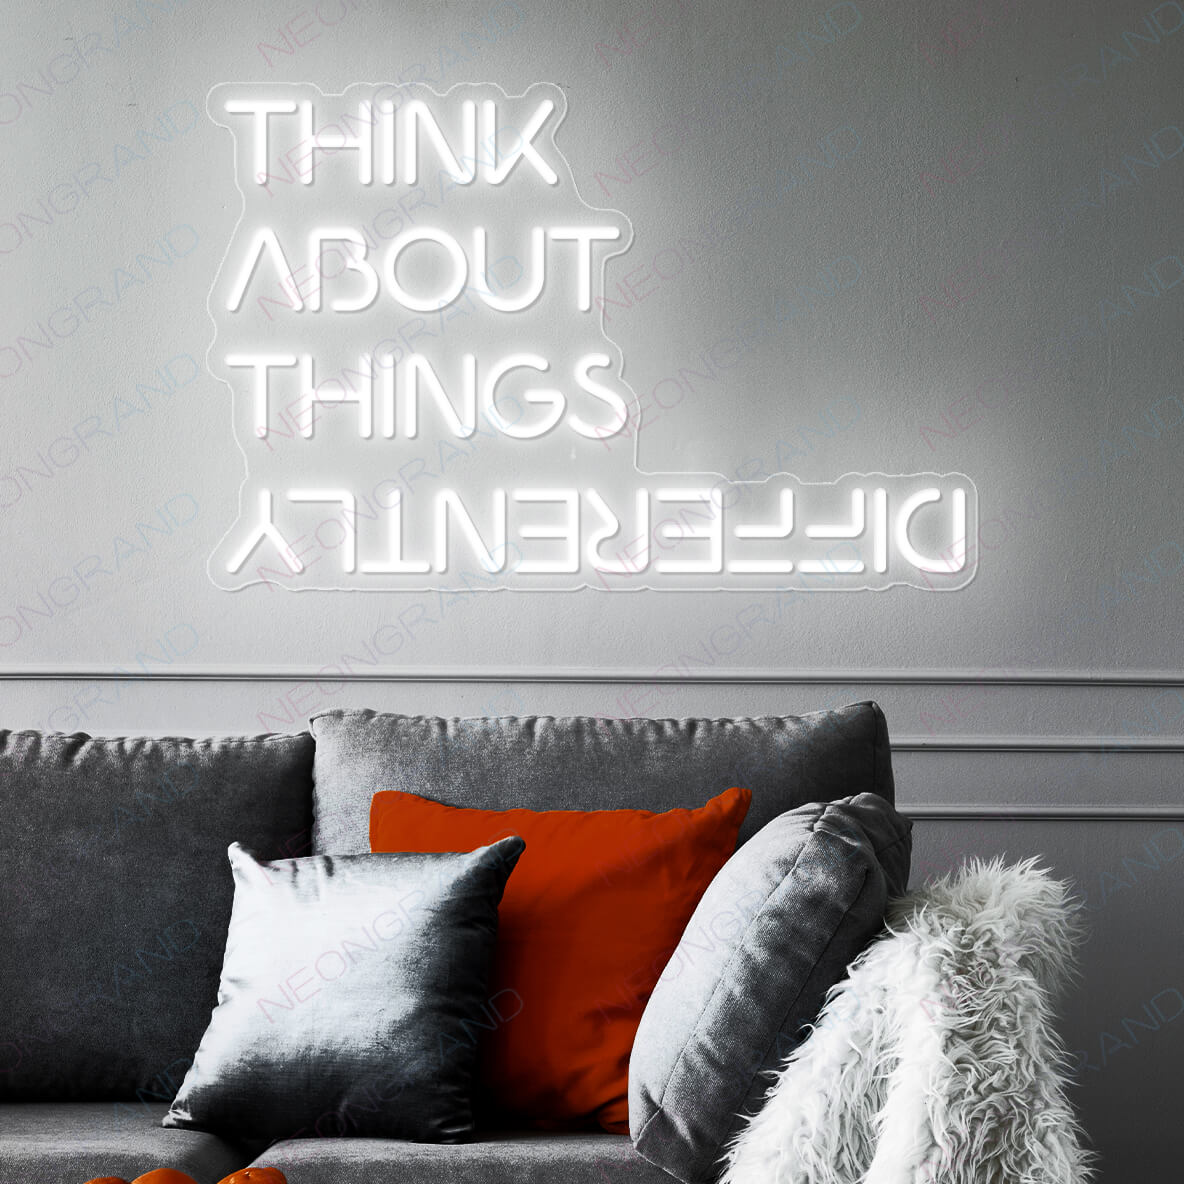 Think About Things Differently Neon Sign Led Light white